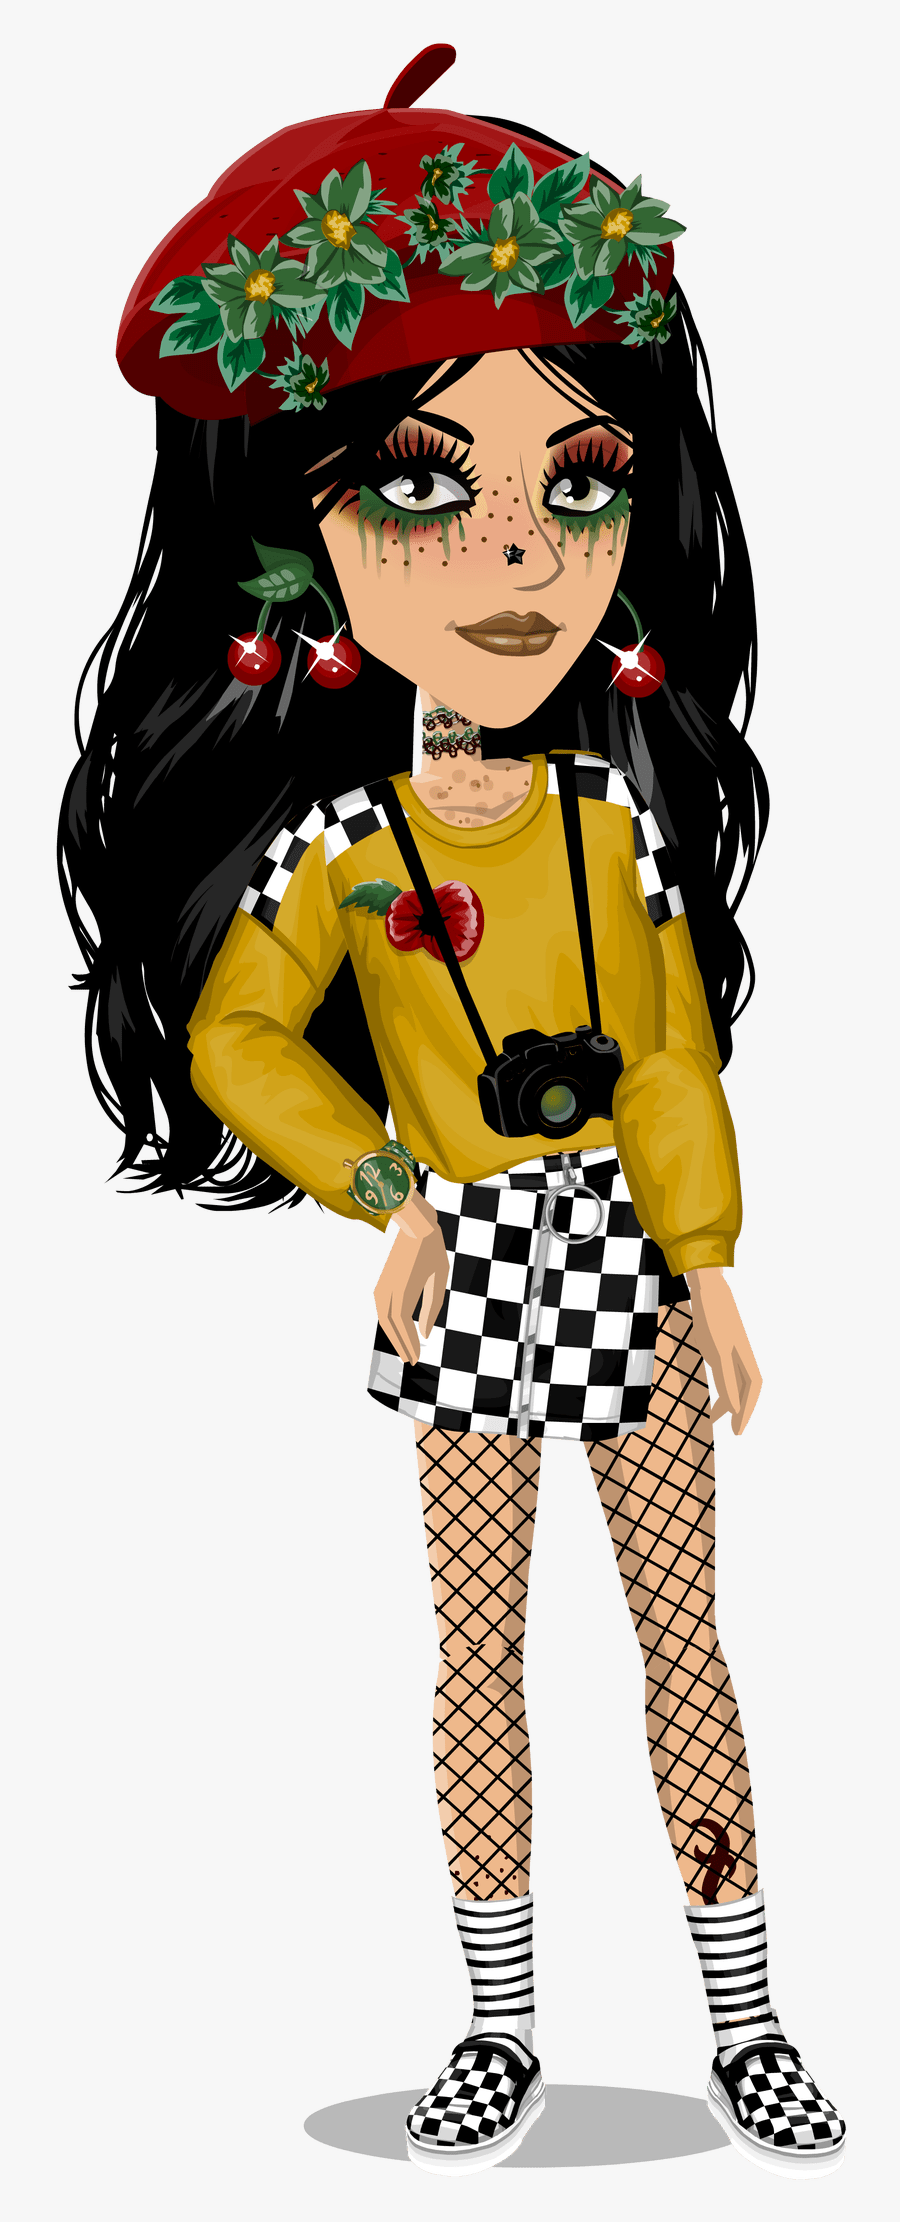 Clip Art Aesthetic Outfits Msp - Lookbook Msp Aesthetic Looks, Transparent Clipart